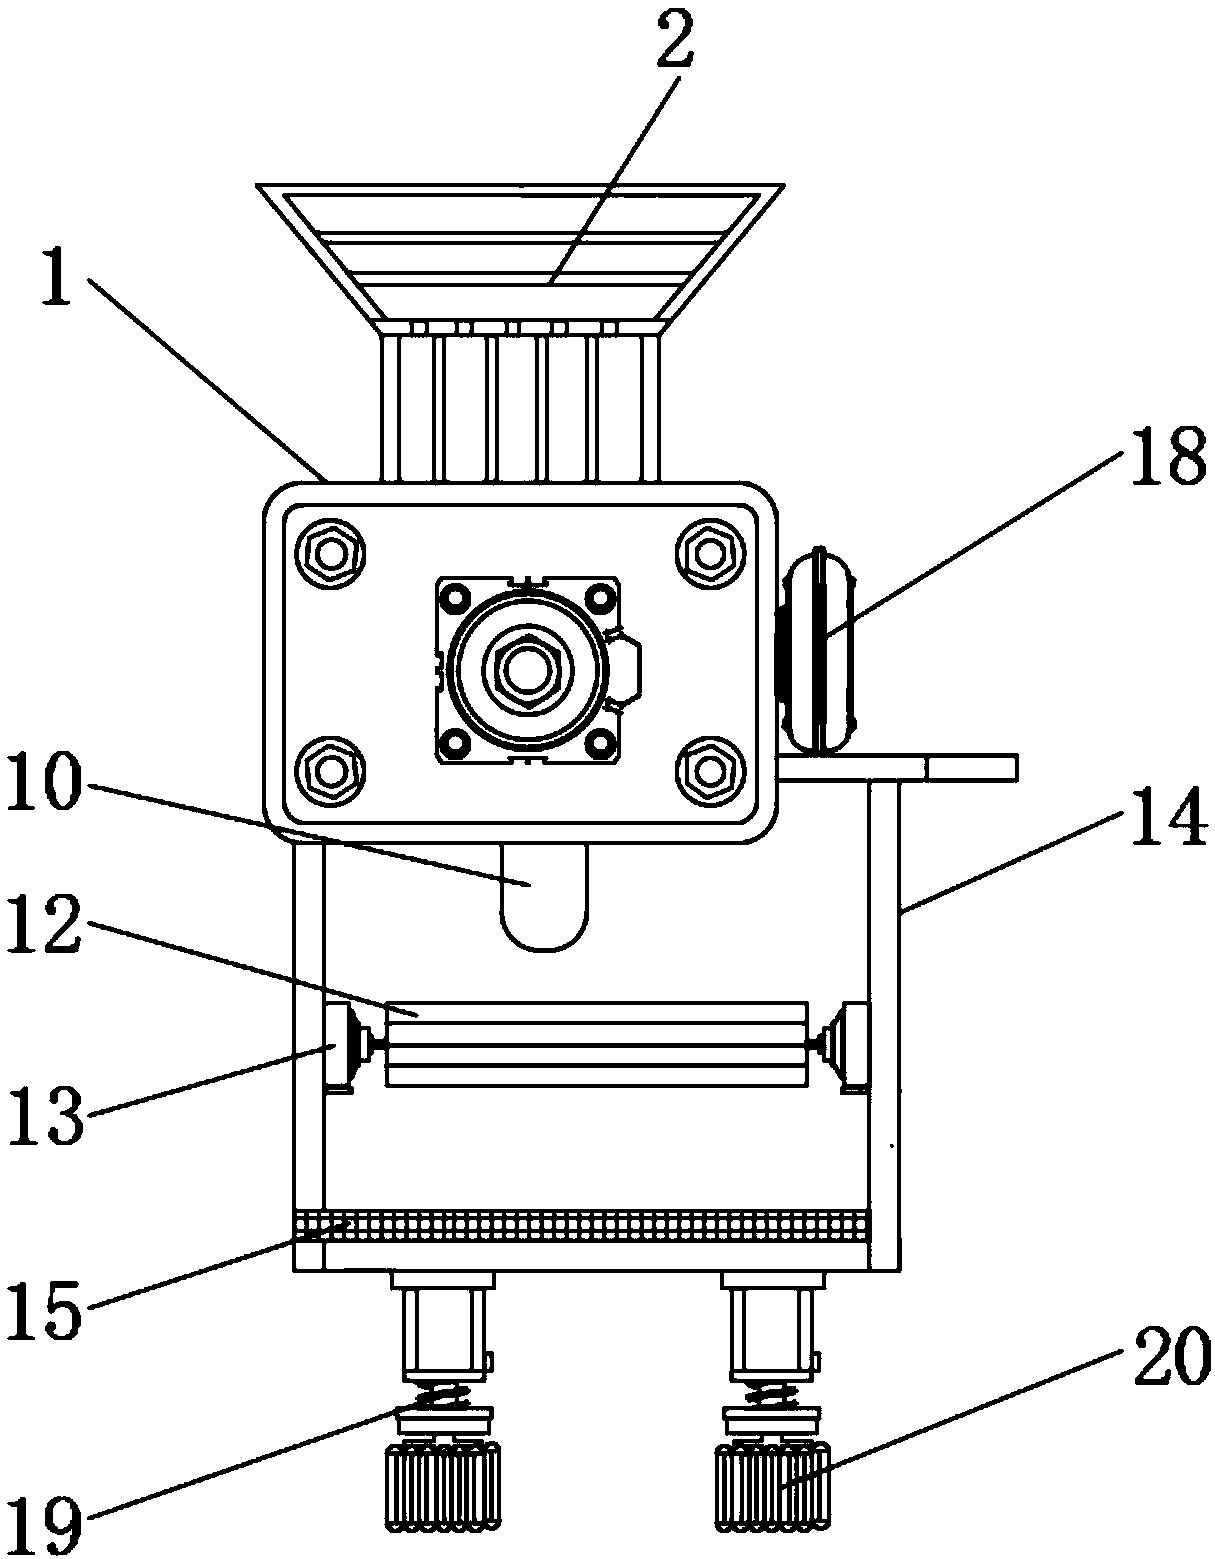 Puffing device with drying function for potato chip processing